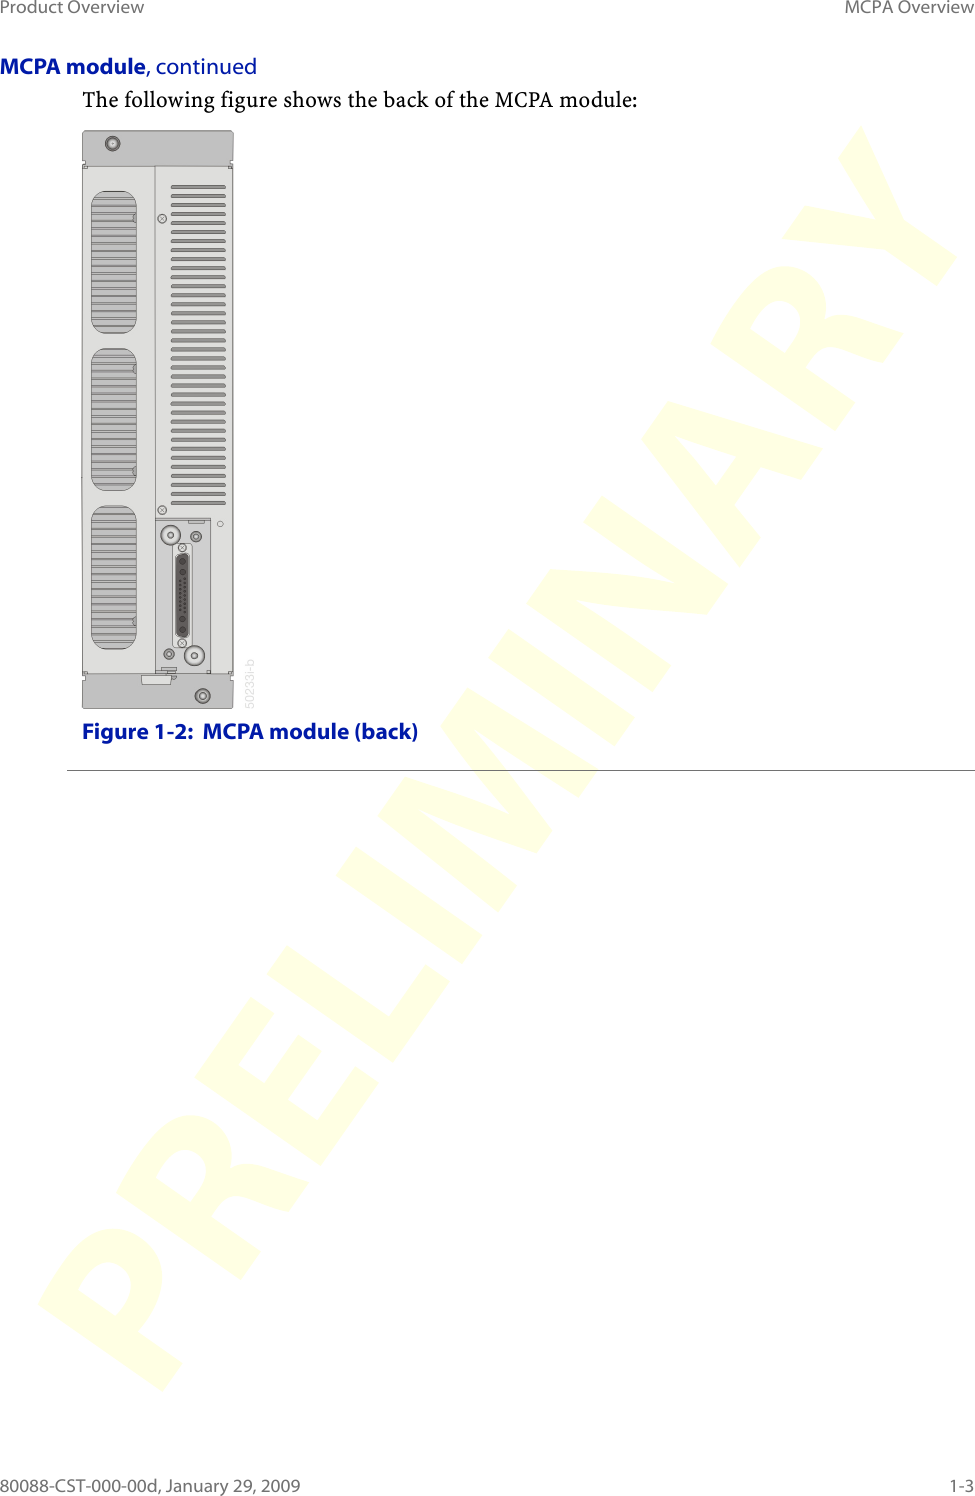 Product Overview MCPA Overview80088-CST-000-00d, January 29, 2009 1-3MCPA module, continuedThe following figure shows the back of the MCPA module:Figure 1-2:  MCPA module (back)